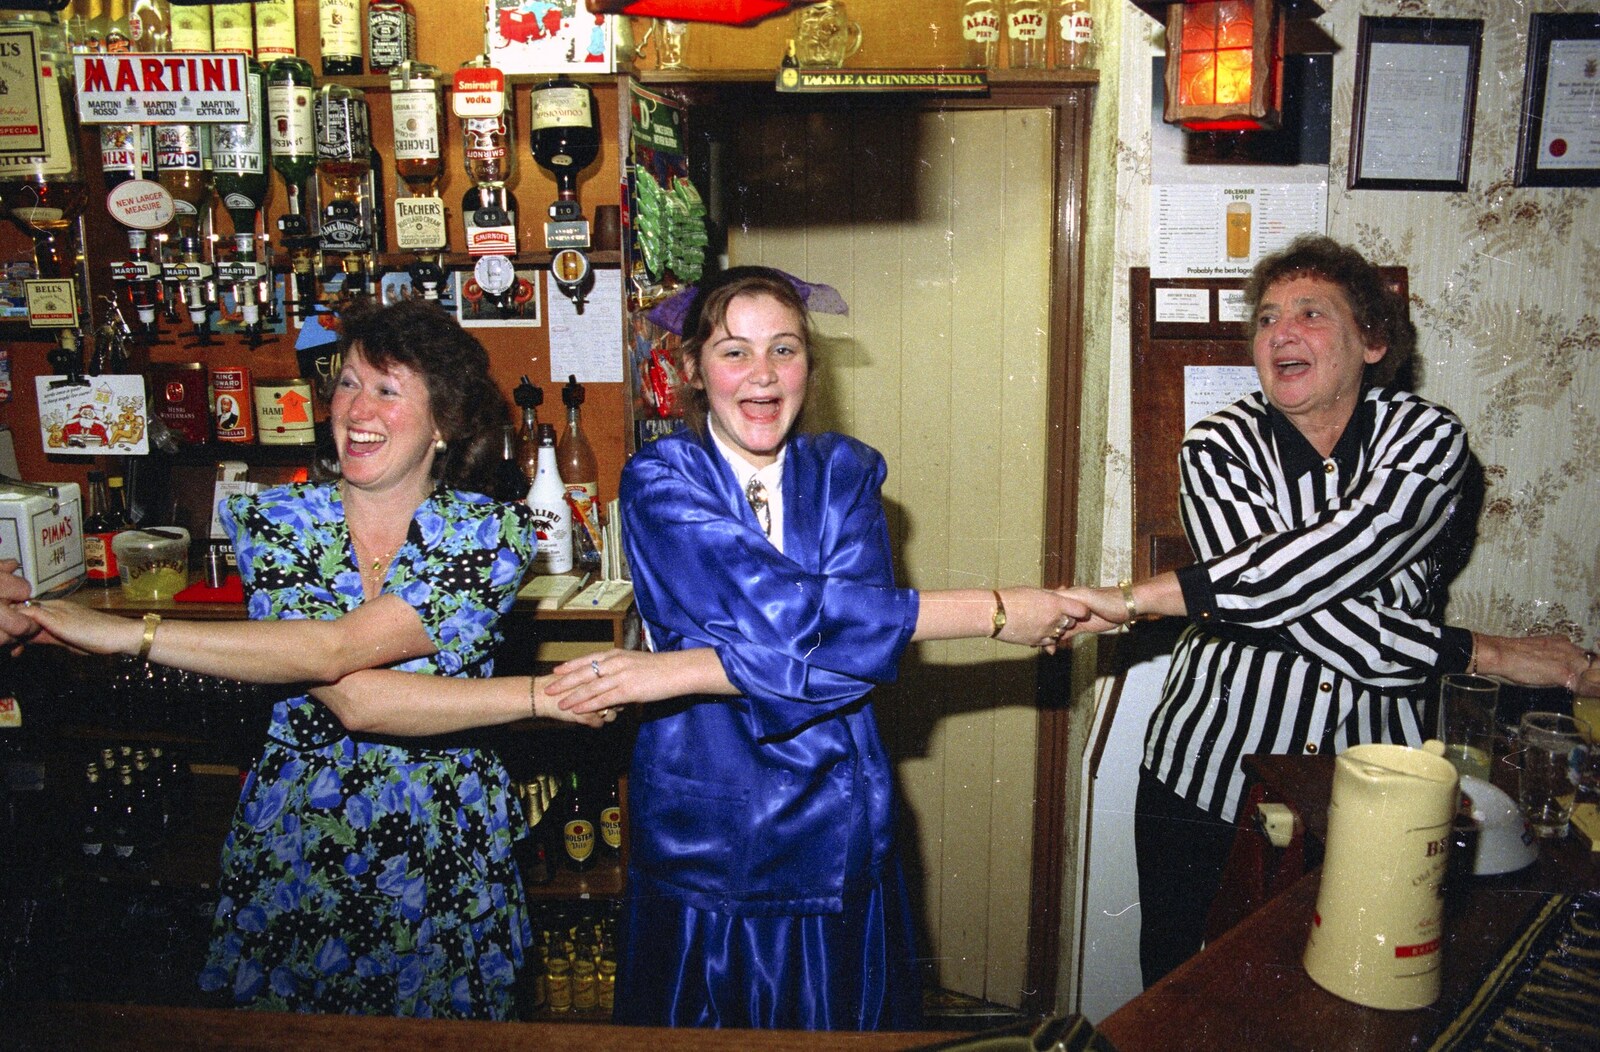 Sylvia, Claire and Nana from New Year's Eve at the Swan Inn, Brome, Suffolk - 31st December 1991